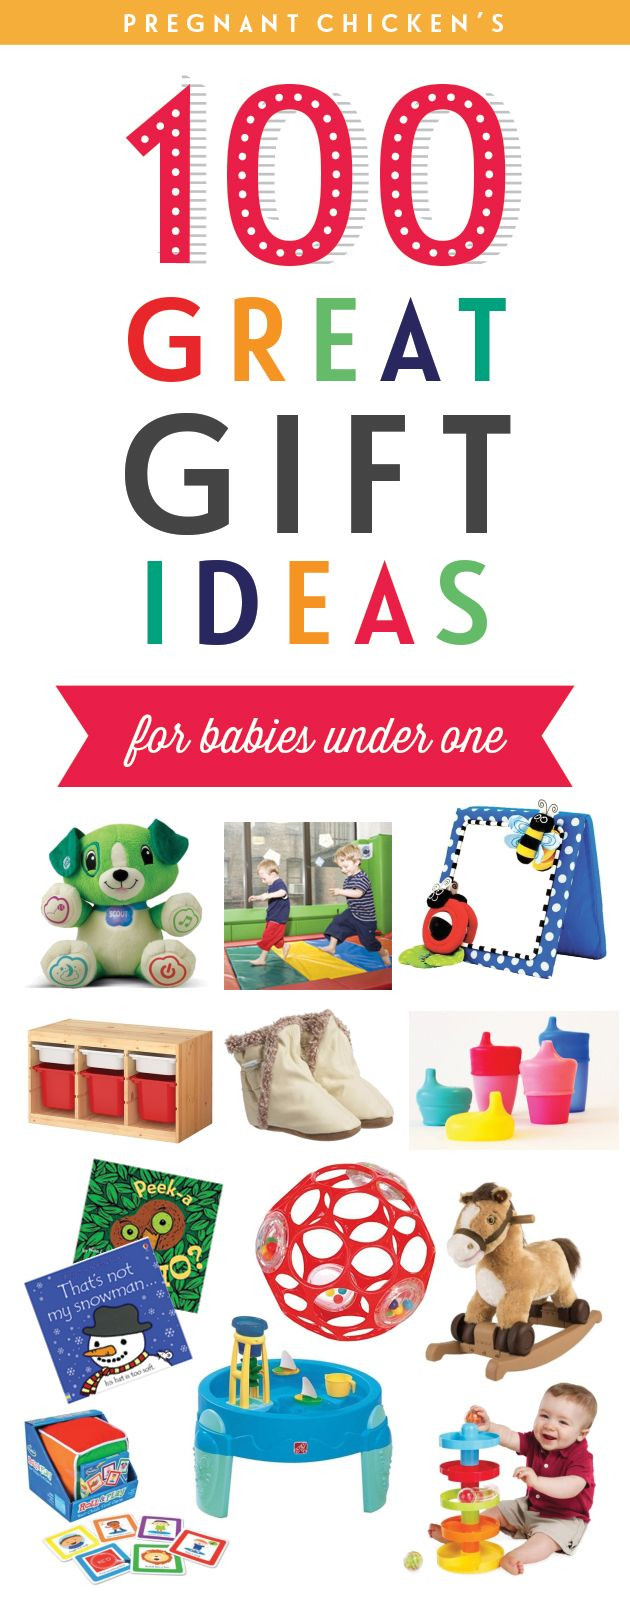 Baby Boy Christmas Gift Ideas
 100 Great Gifts Ideas for Babies Under e